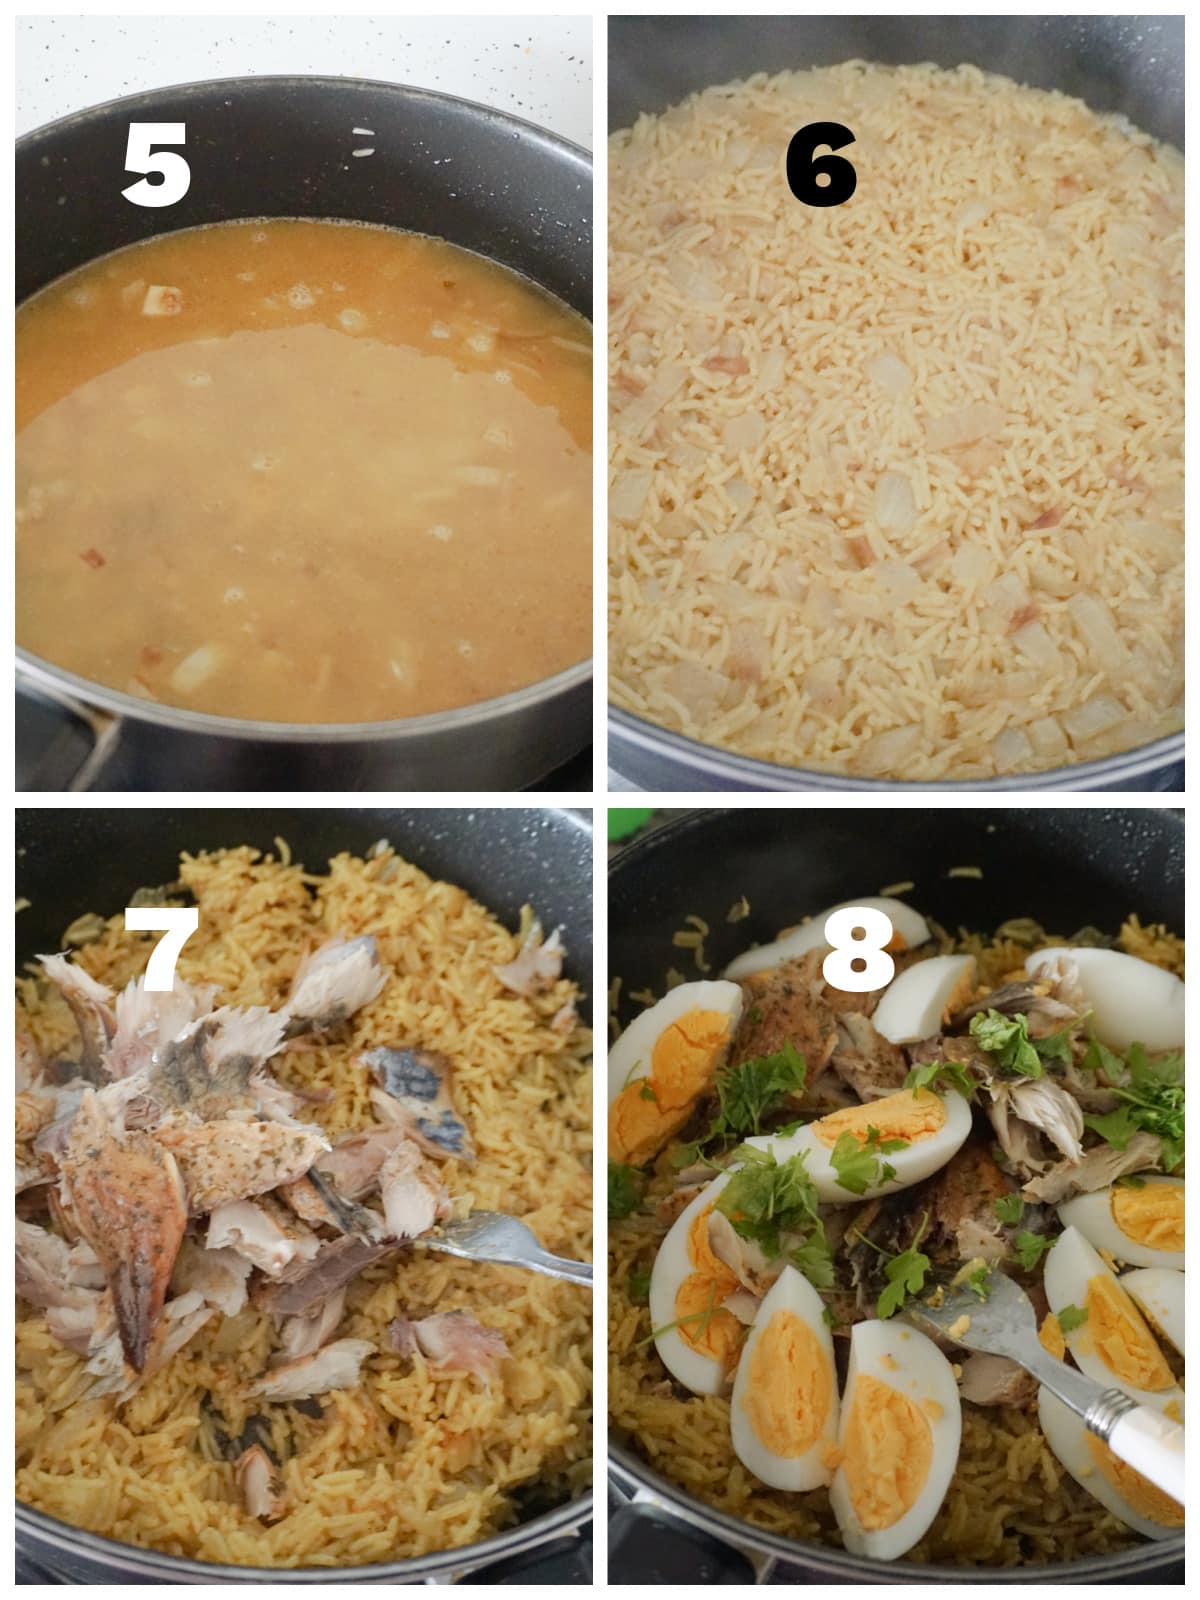 Collage of 4 photos to show how to make kedgeree with smoked mackerel.